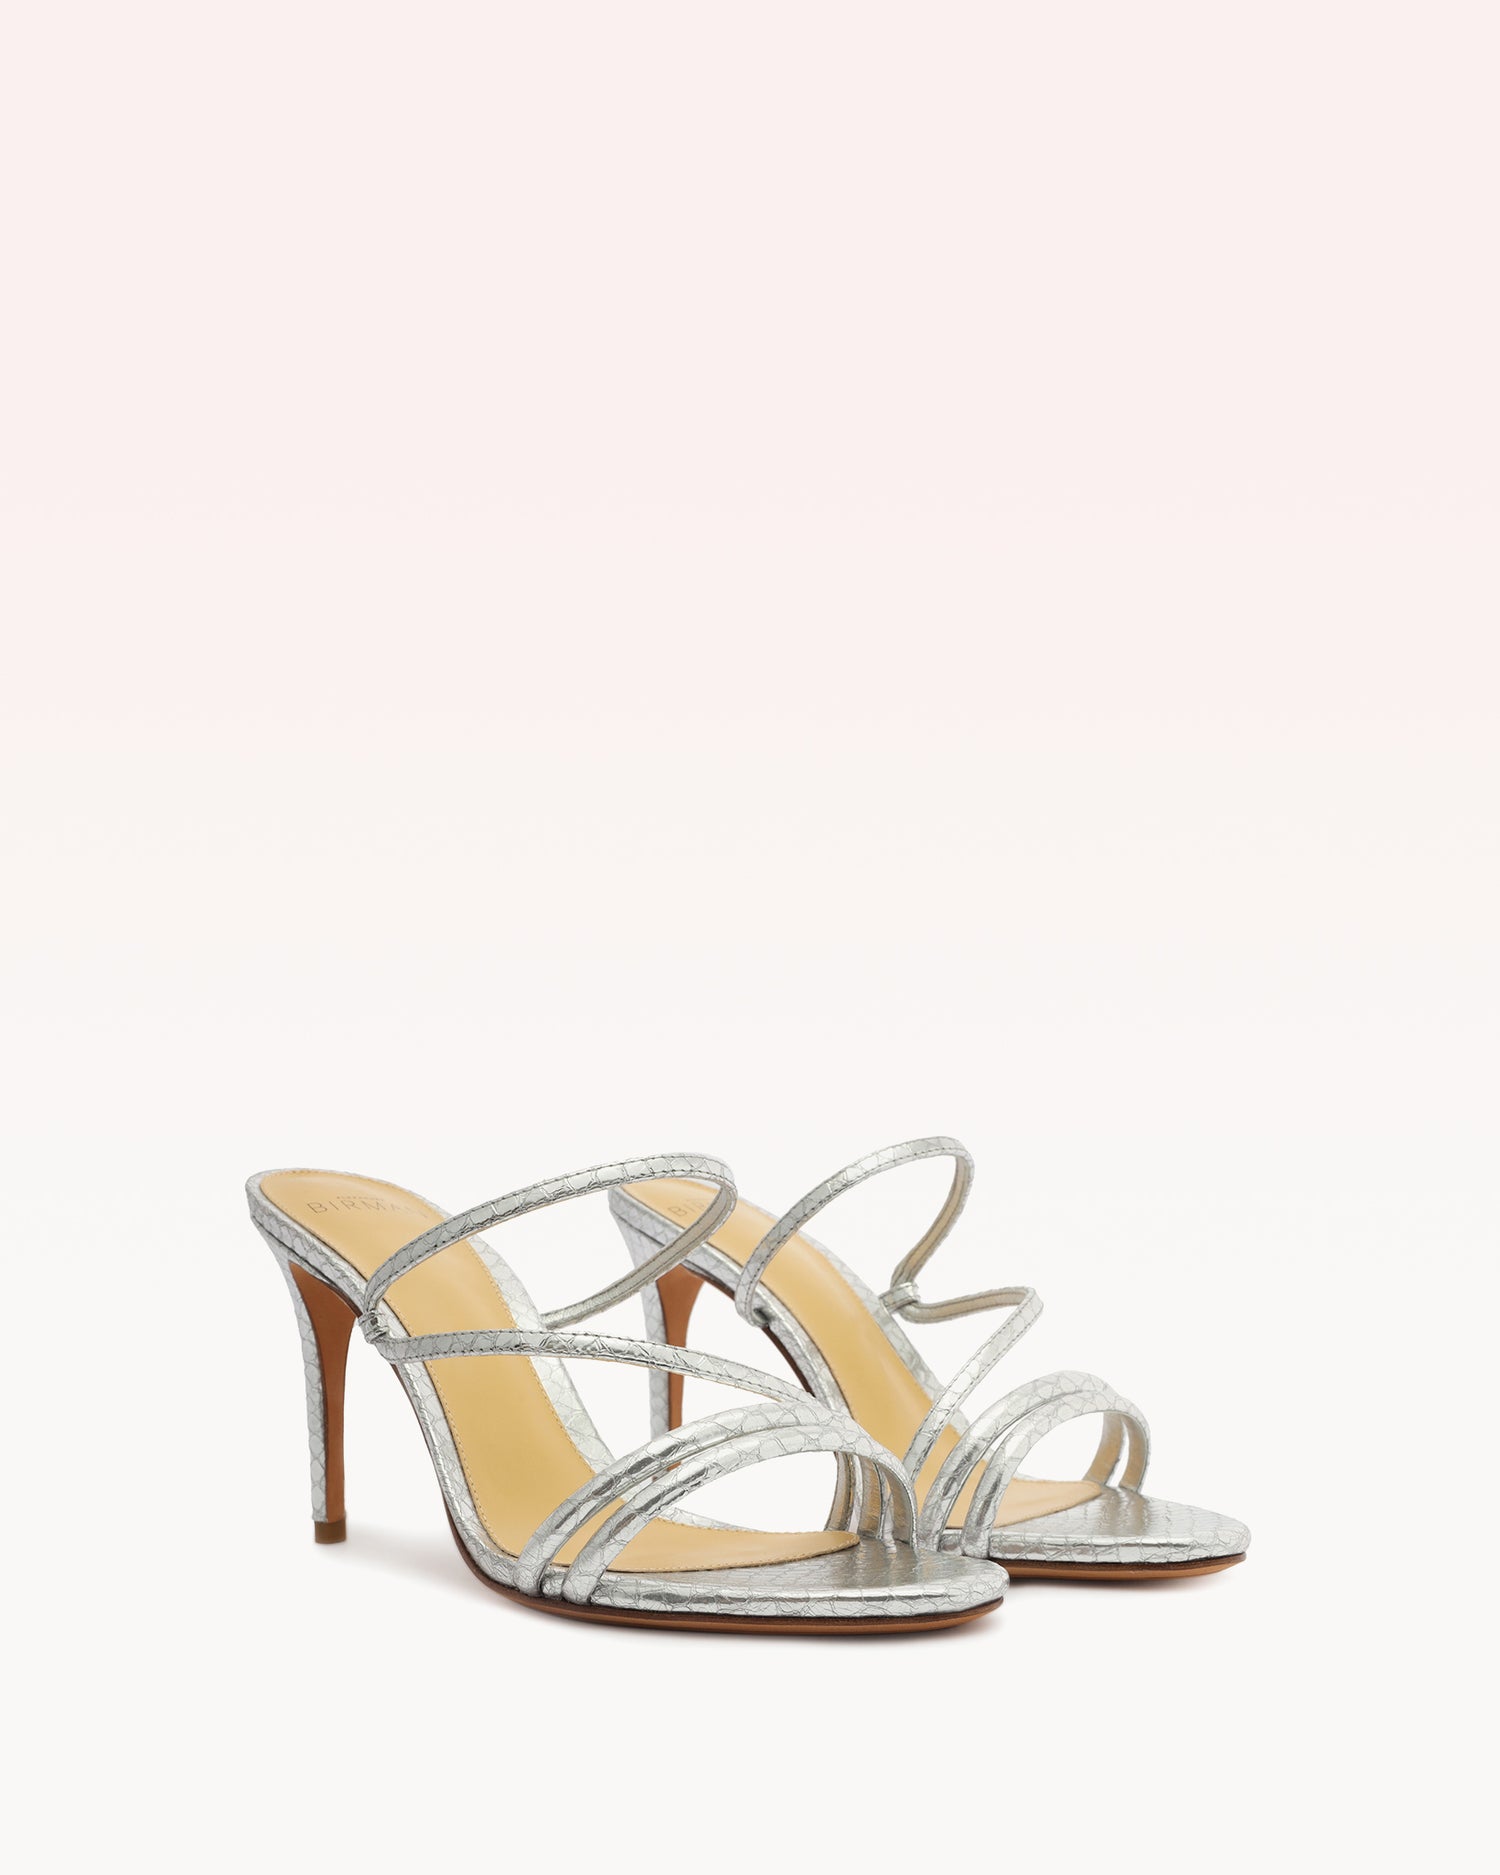 Eve 85 Silver Sandals PRE FALL 23   